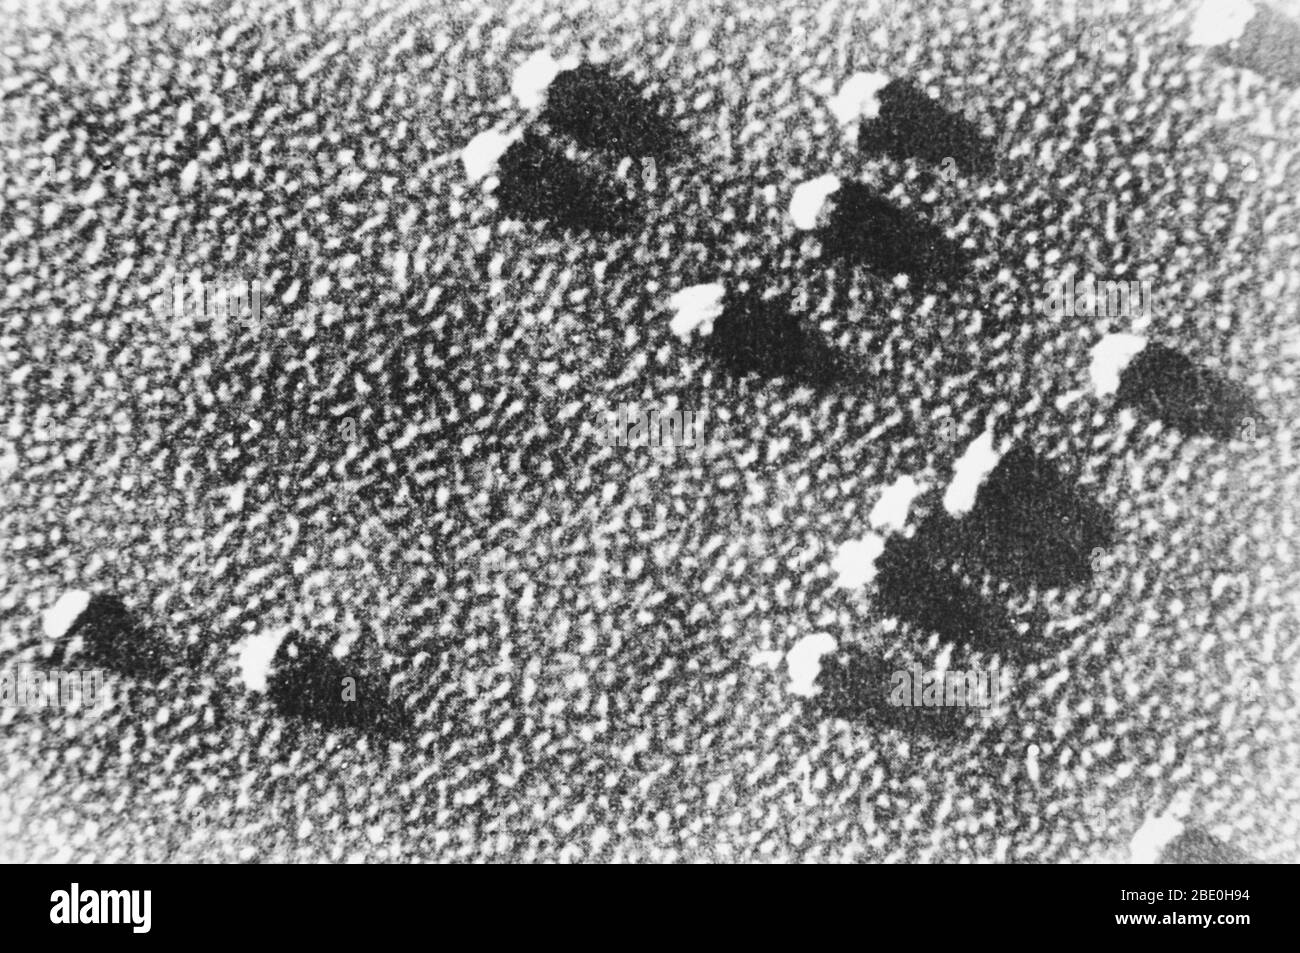 Scanning electron micrograph (SEM) showing ribosome particles. The ribosome is a complex molecular machine, found within all living cells, that serves as the site of biological protein synthesis (translation). Ribosomes link amino acids together in the order specified by messenger RNA (mRNA) molecules. Ribosomes consist of two major components: the small ribosomal subunit, which reads the RNA, and the large subunit, which joins amino acids to form a polypeptide chain. Each subunit is composed of one or more ribosomal RNA (rRNA) molecules and a variety of ribosomal proteins (r-protein or rProte Stock Photo